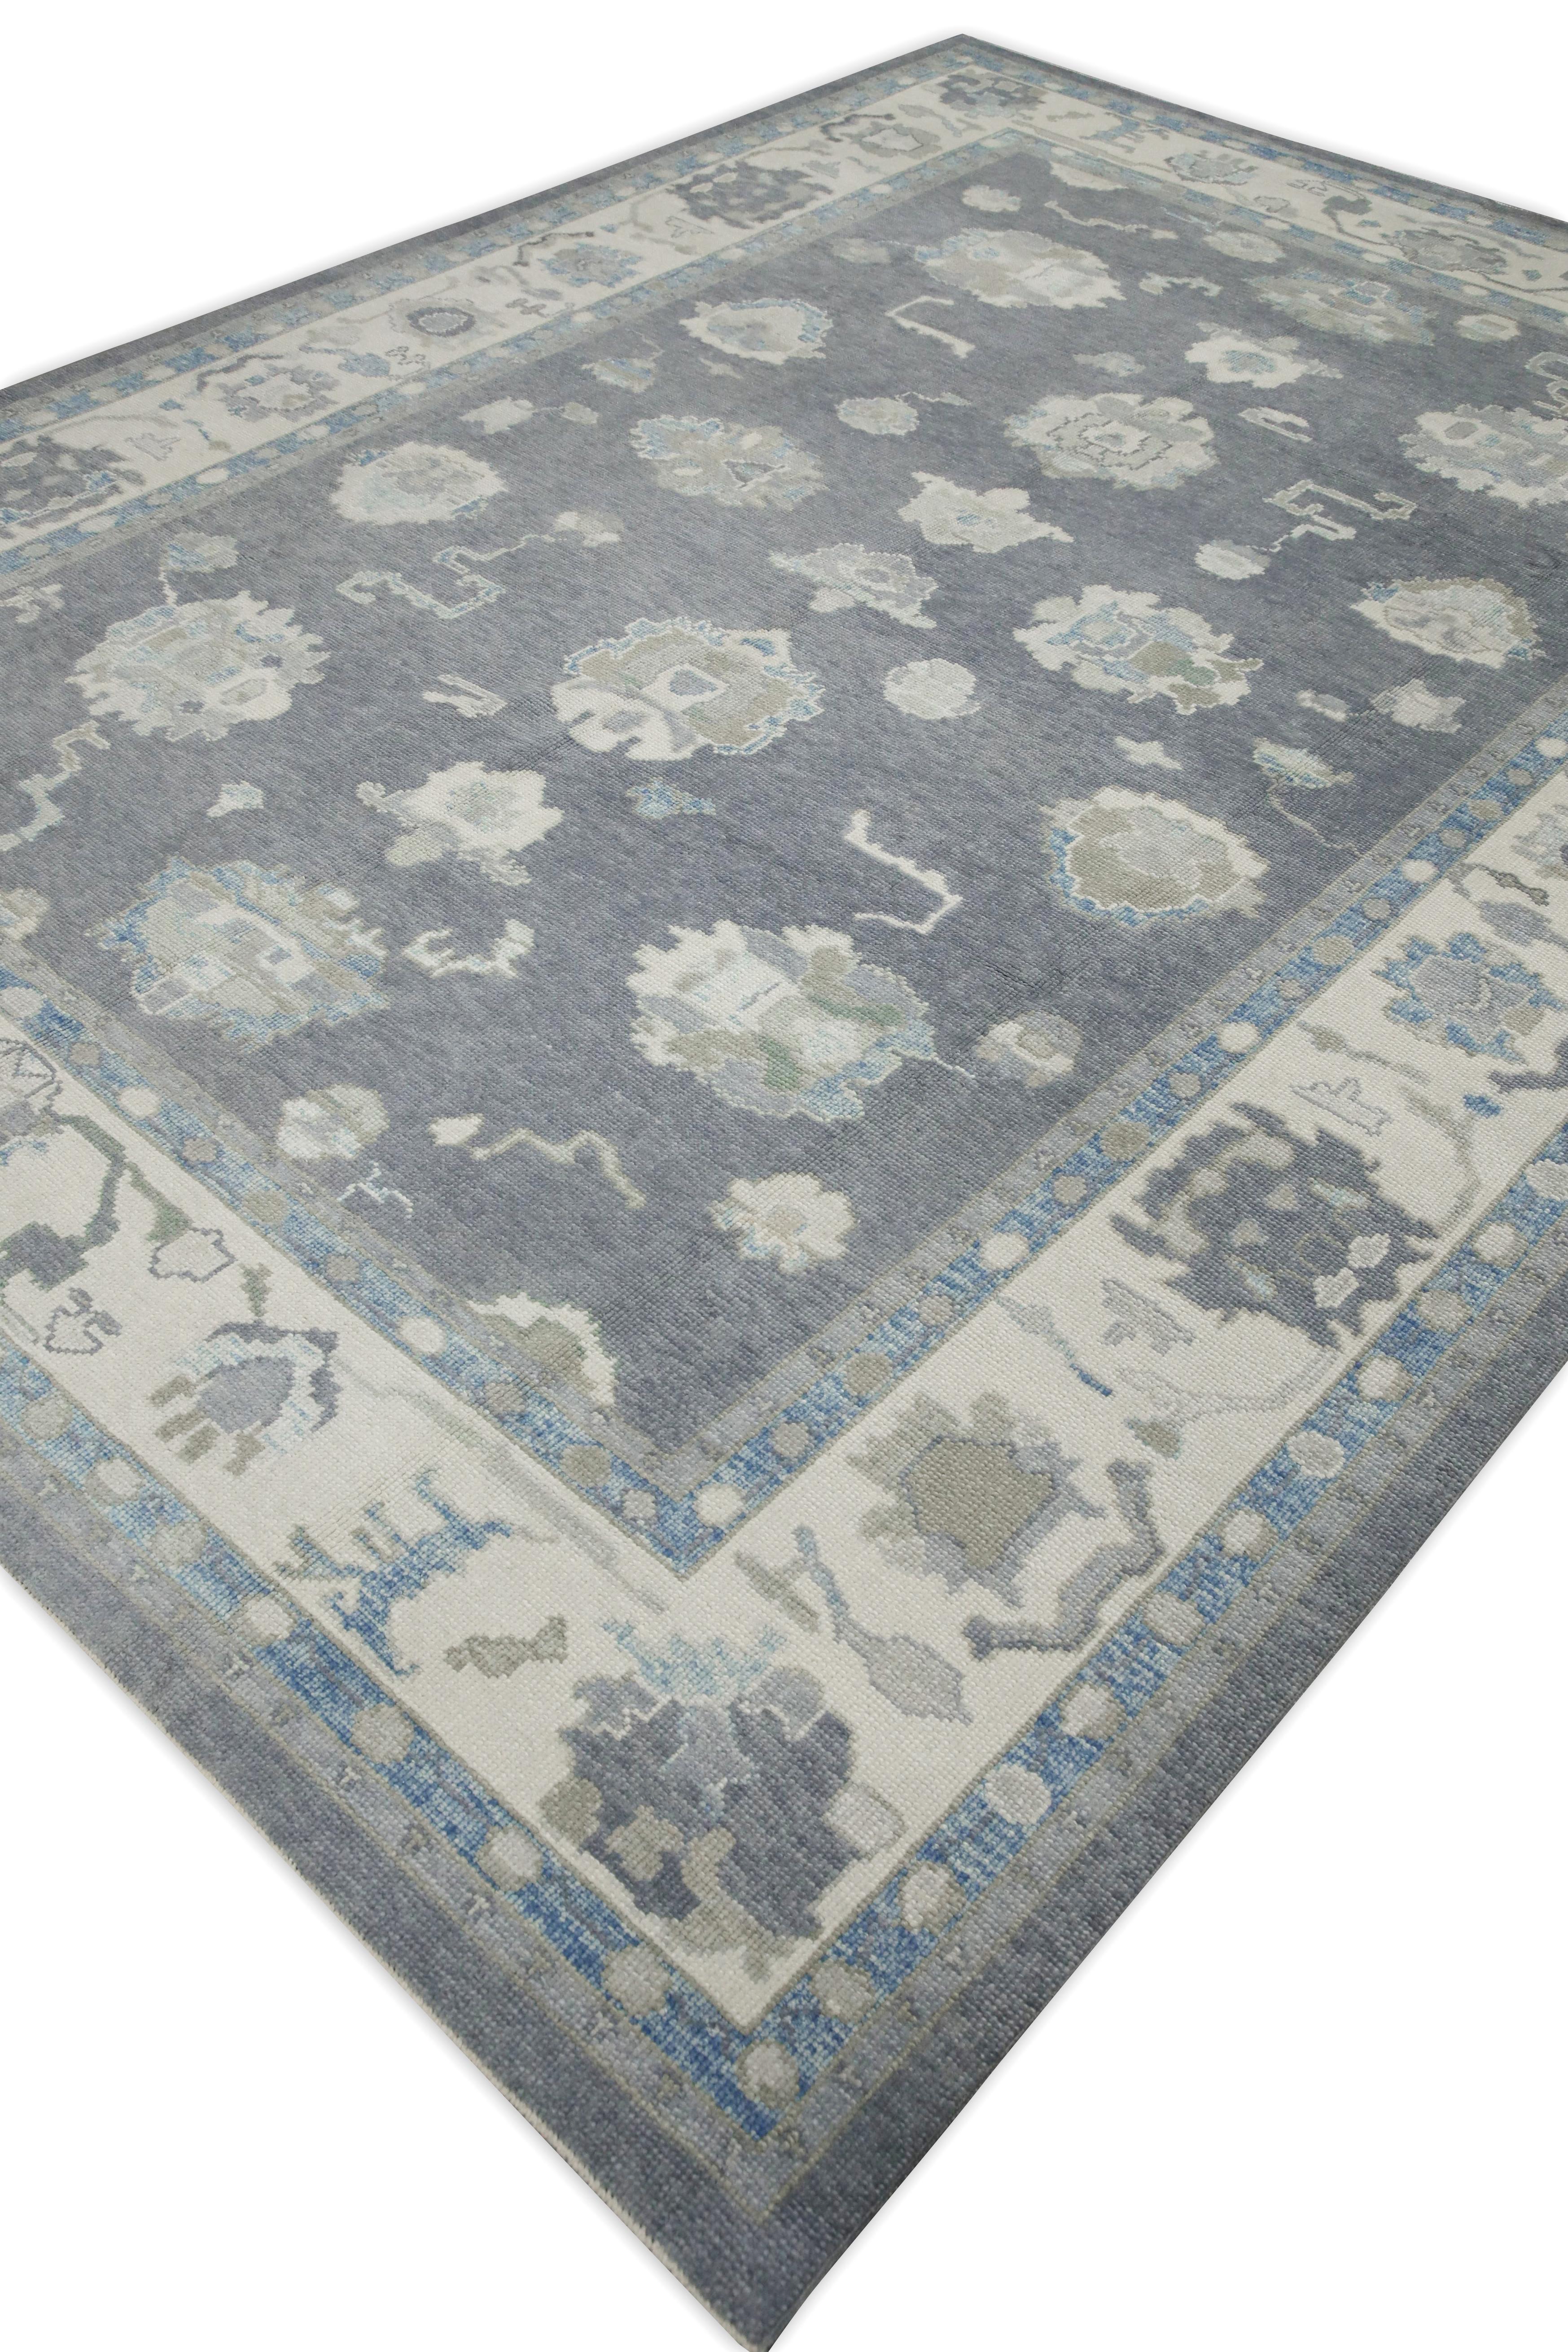 Contemporary Gray & Blue Floral Design Handwoven Wool Turkish Oushak Rug 9' X 11'10